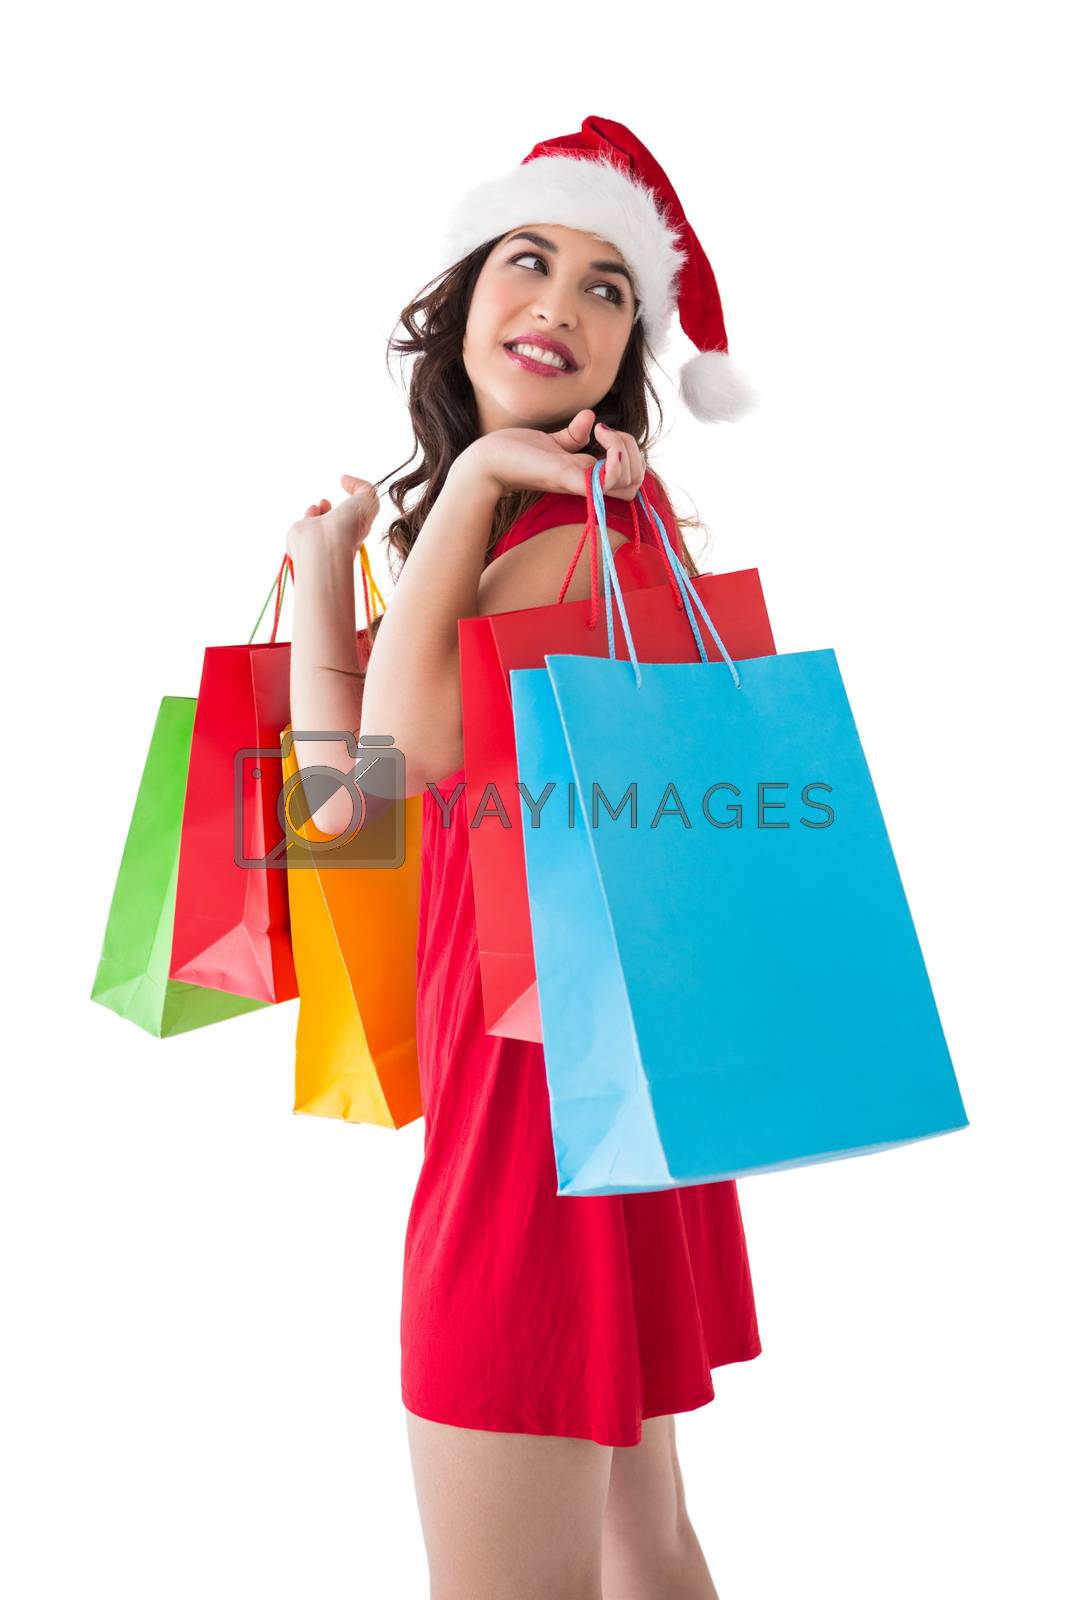 Royalty free image of Smiling brunette holding shopping bags  by Wavebreakmedia